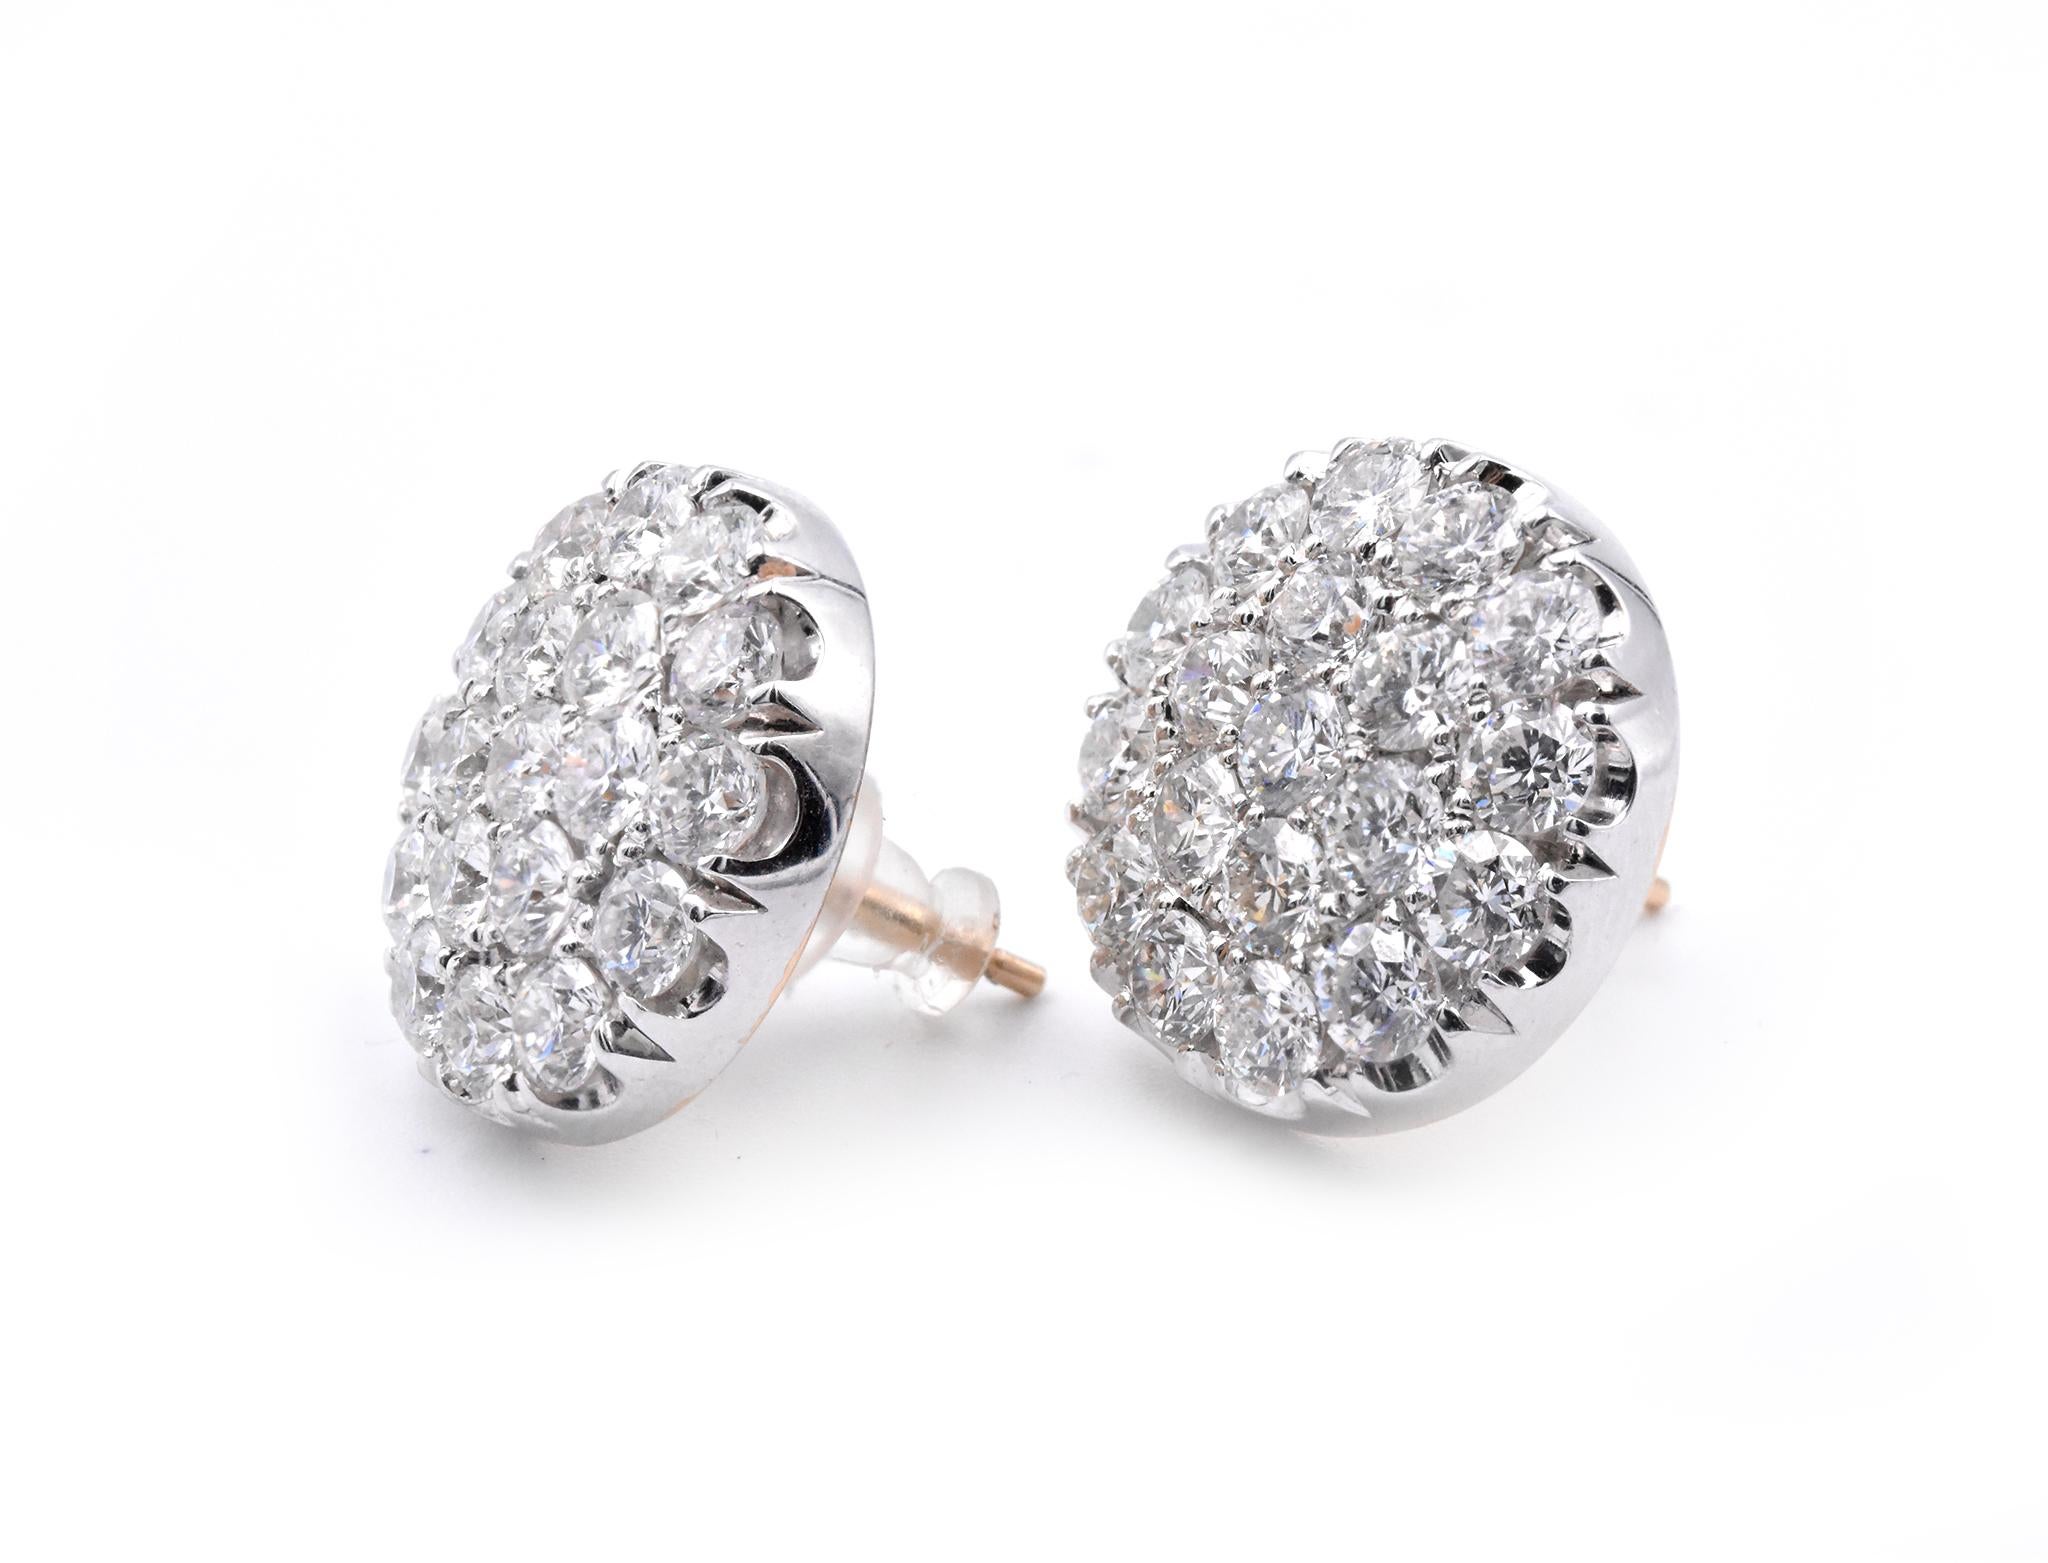 Material: 14k two tone gold
Diamonds: 38 round brilliant cuts = 5.25cttw
Color: G
Clarity: VS
Dimensions: earrings measure 16.65mm in diameter
Fastenings: post with rubber push back
Weight: 9.4 grams